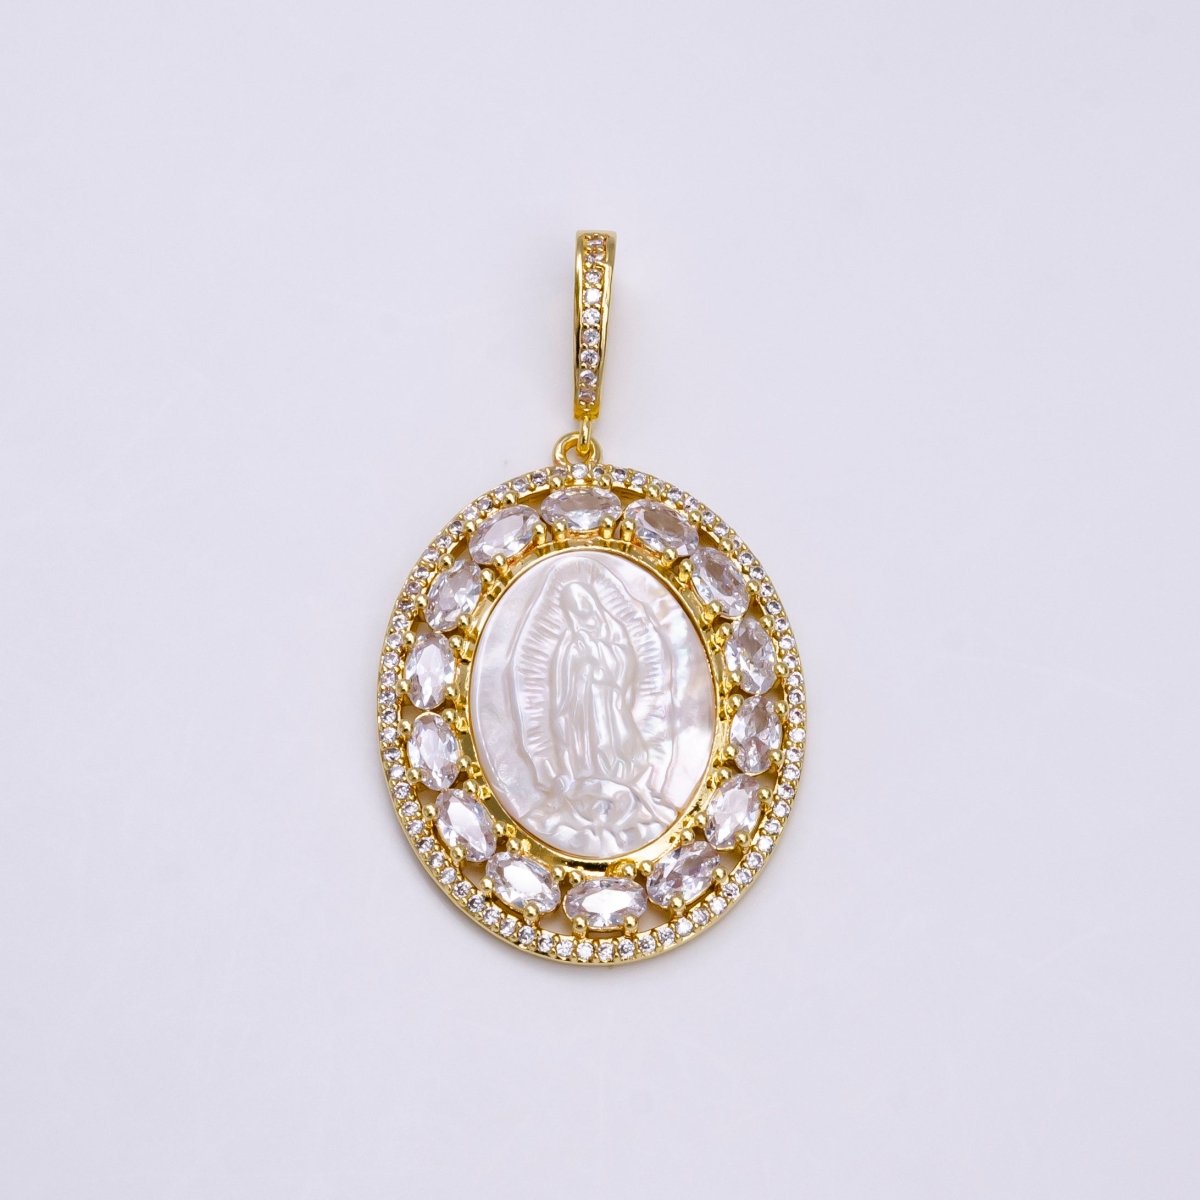 Antique Virgin Mary Lady Guadalupe Gold Pendant, Pearl Mary Pendant Religious Jewelry Making AA-745 - DLUXCA